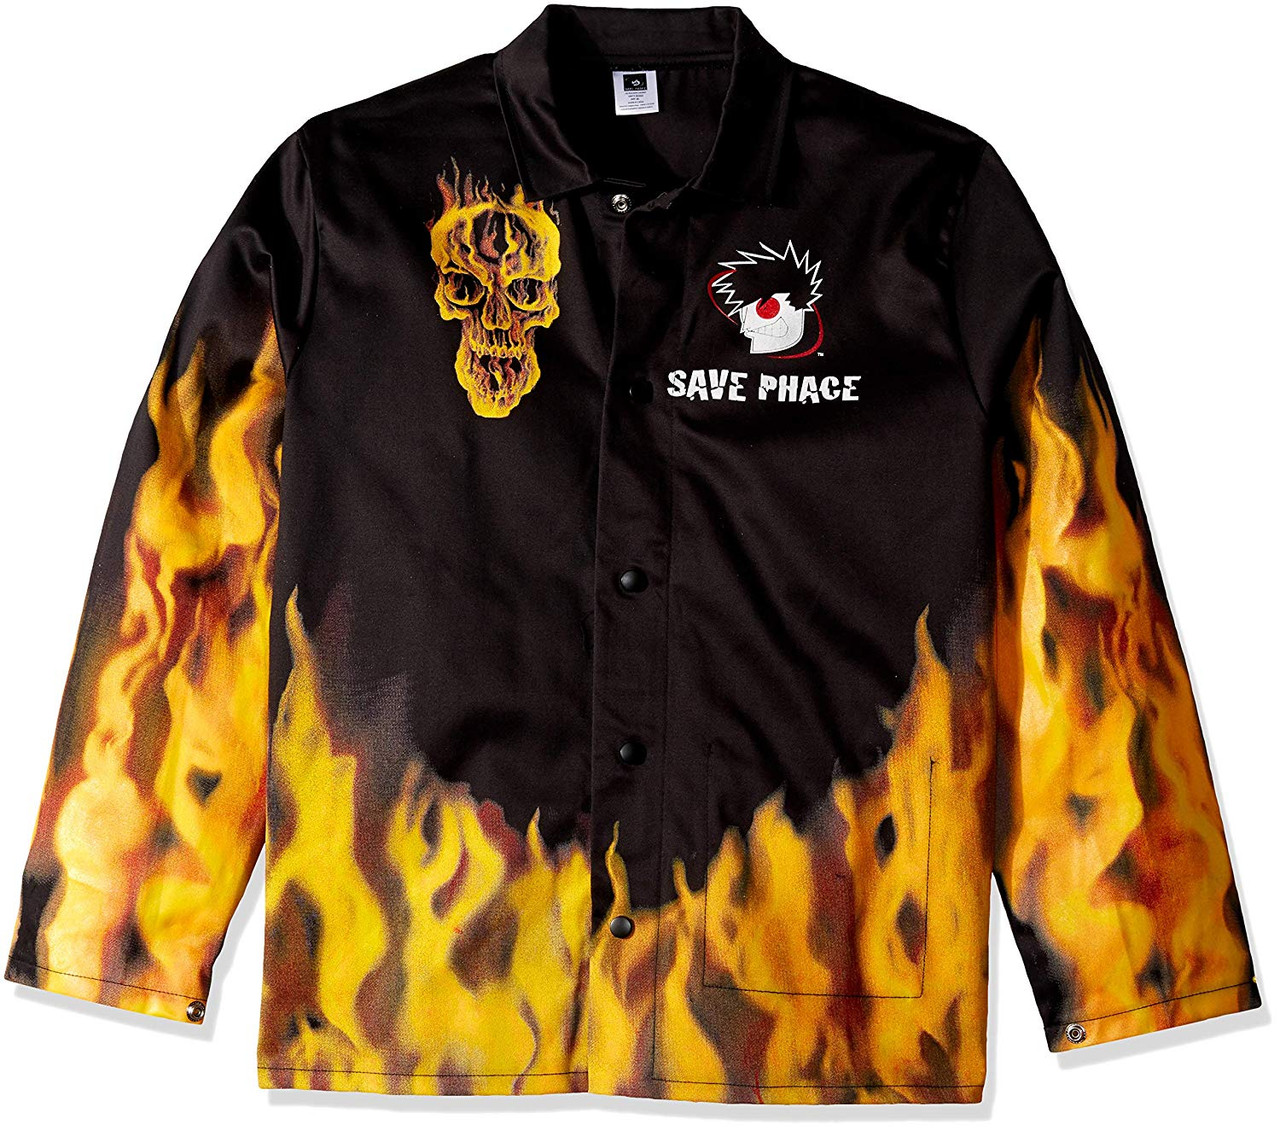 save phace welding jacket with flames